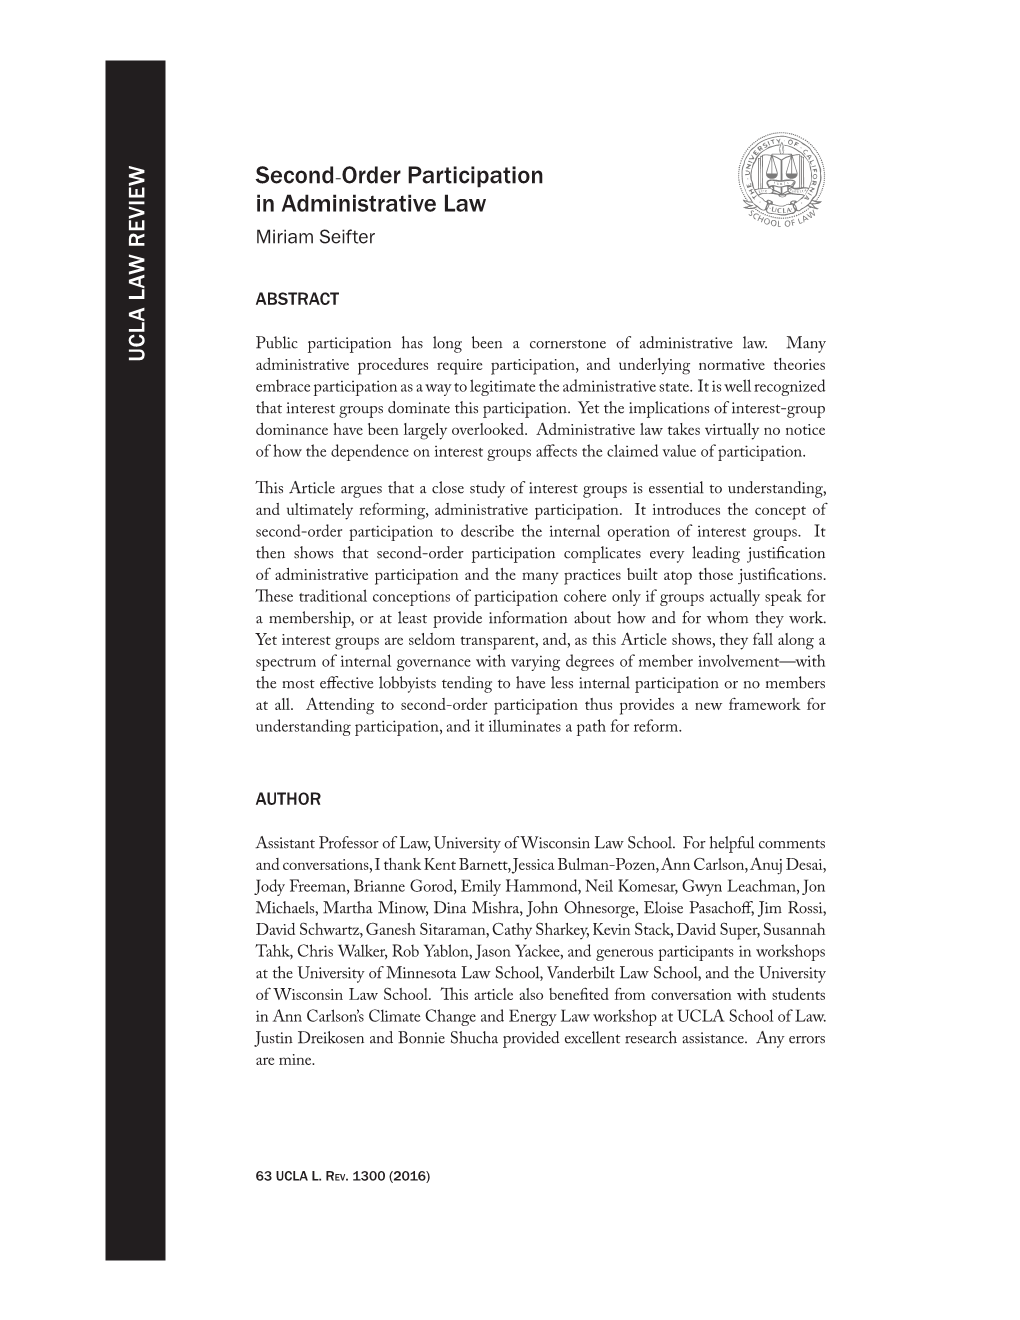 Second-Order Participation in Administrative Law Miriam Seifter